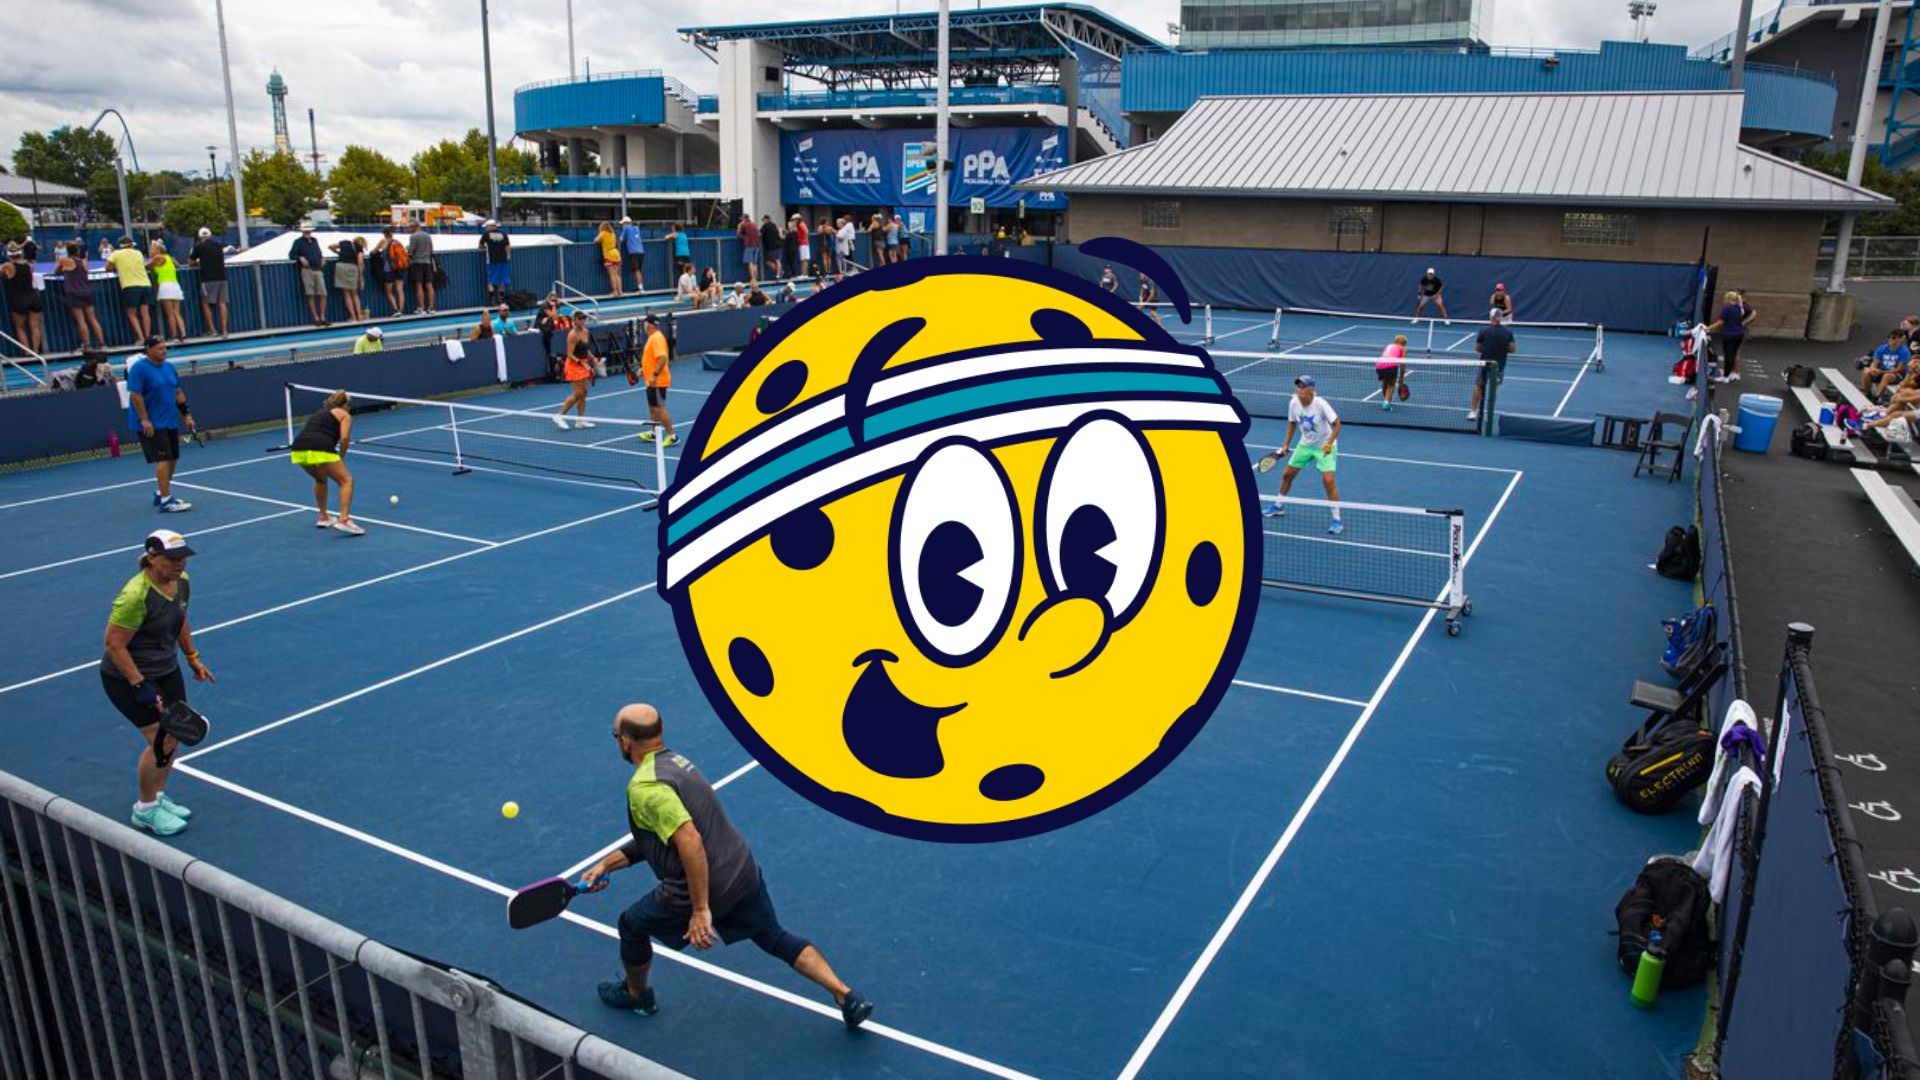 Pickleheads Becomes One of the First VC Backed Pickleball Companies